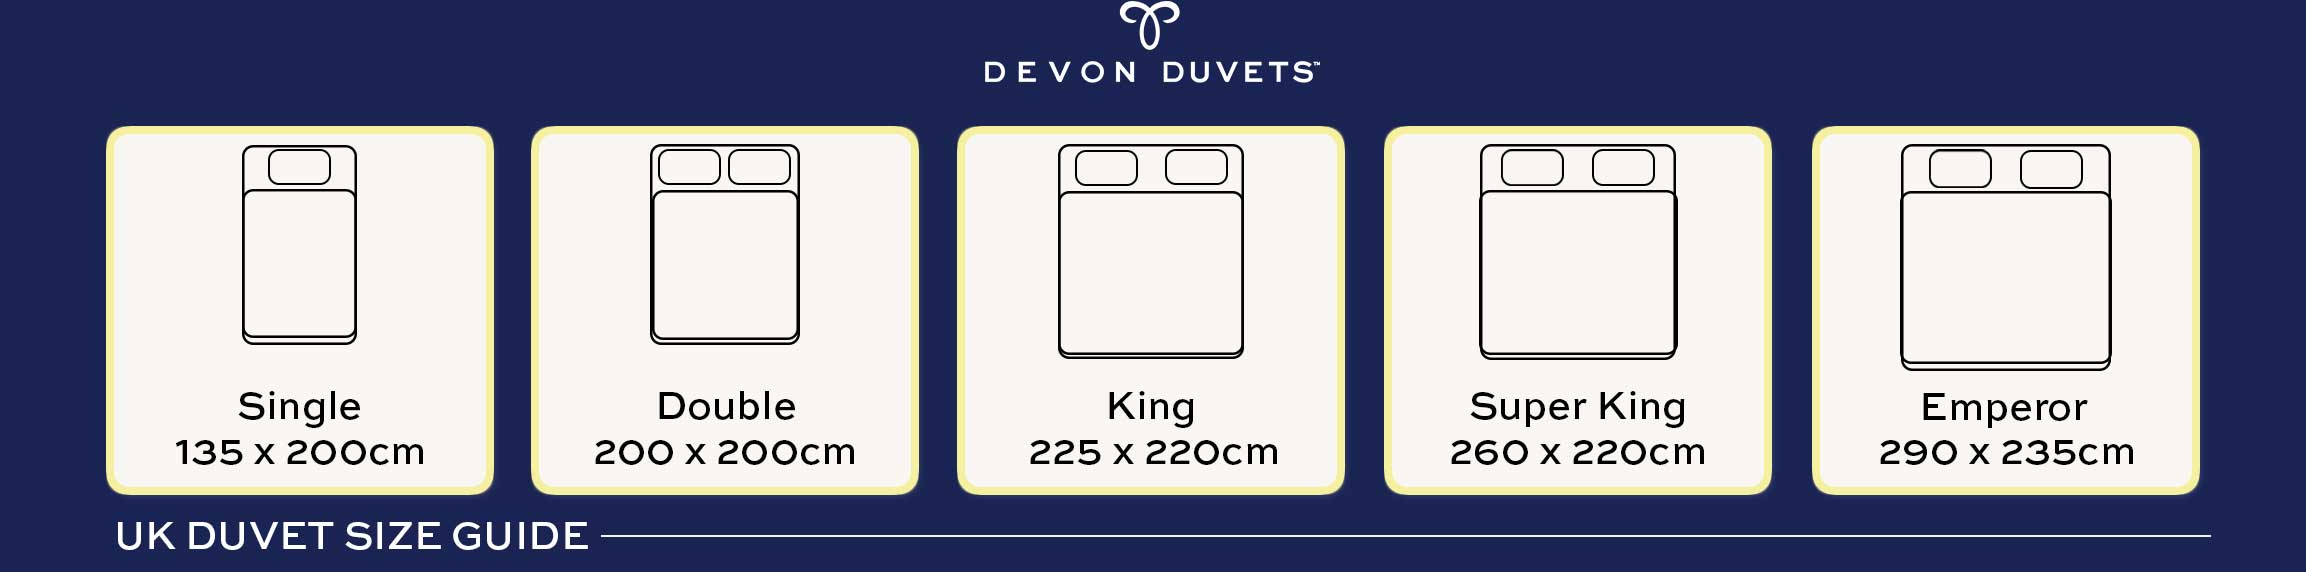 Illustrated guide comparing dimensions of Single, Double, King, and other duvet sizes.